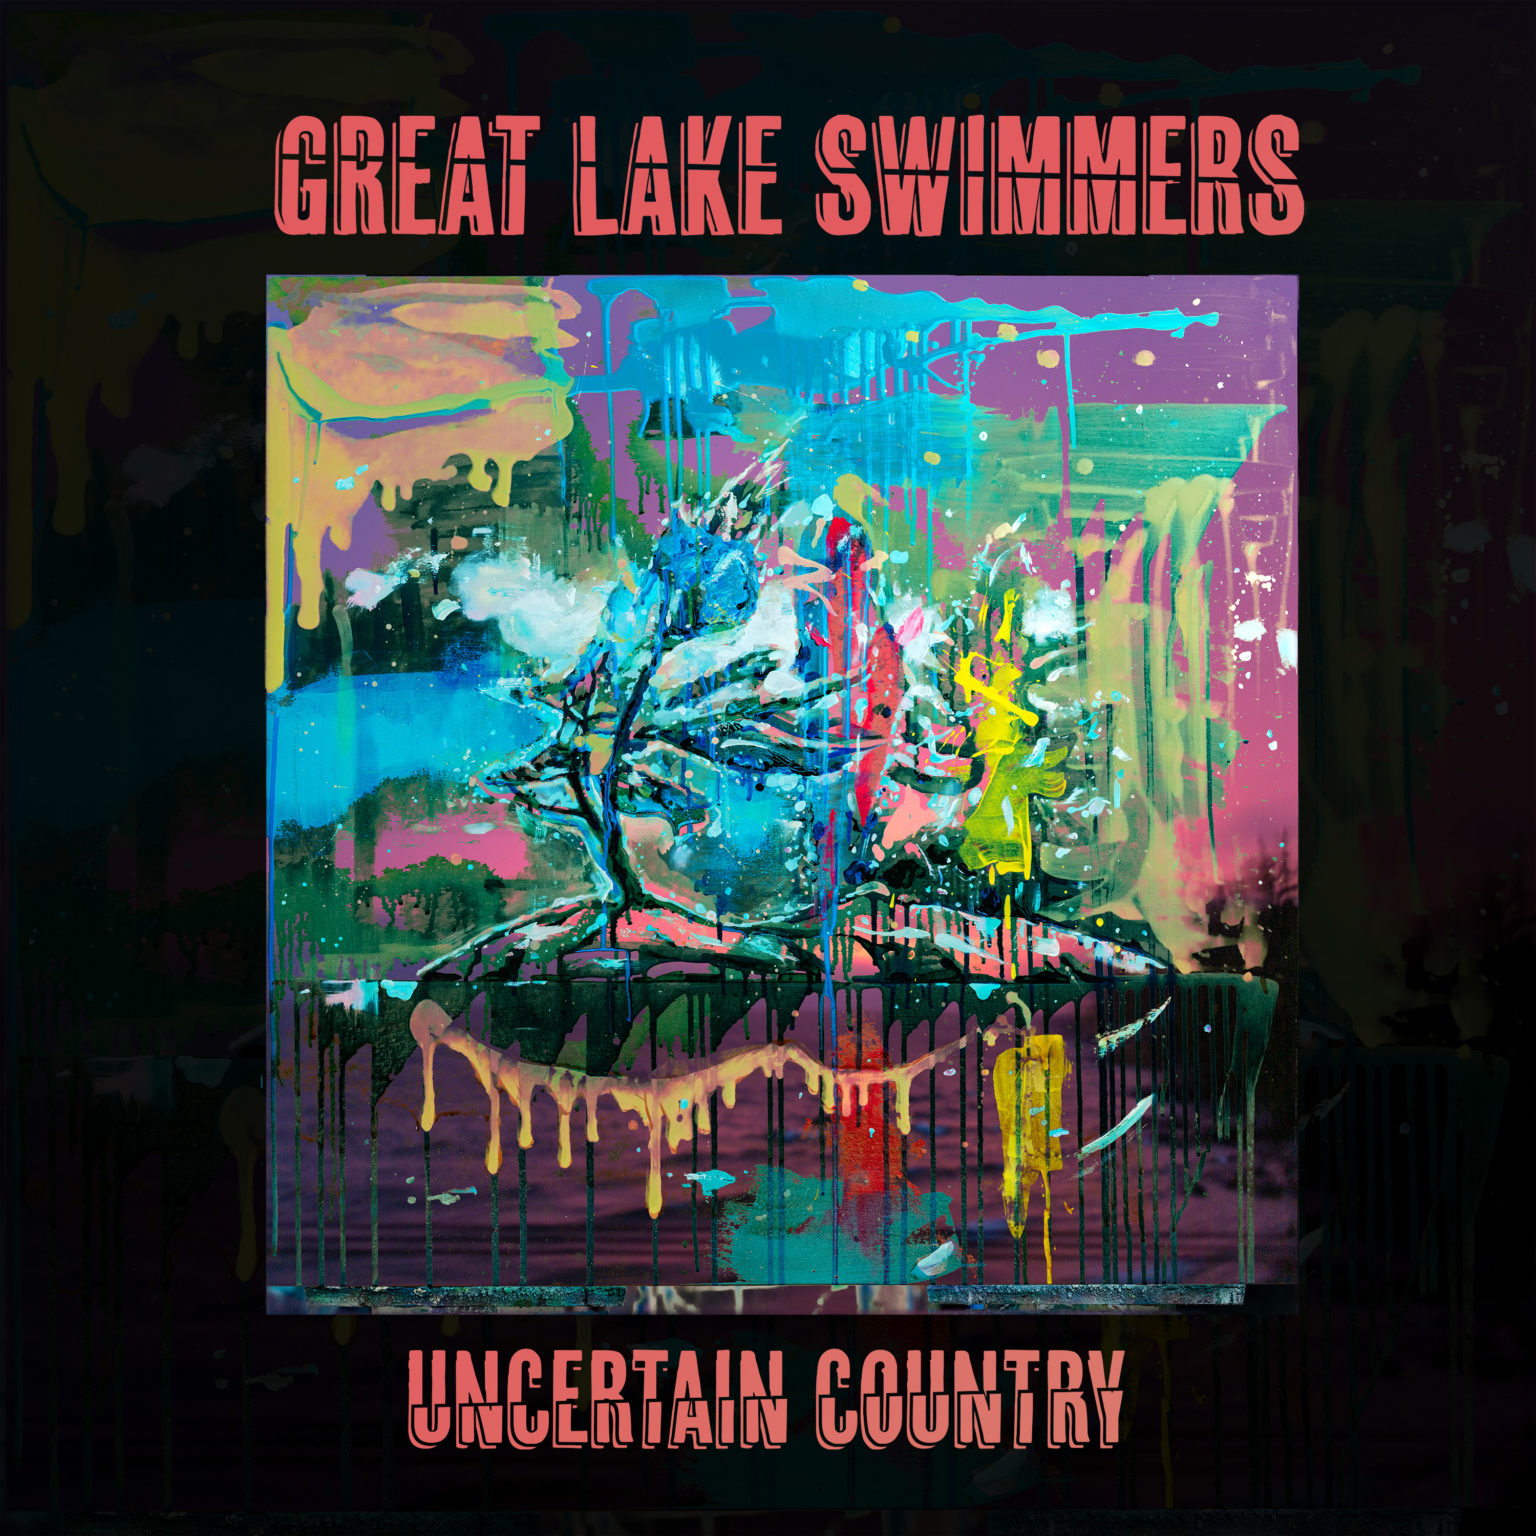 Great Lake Swimmers album cover